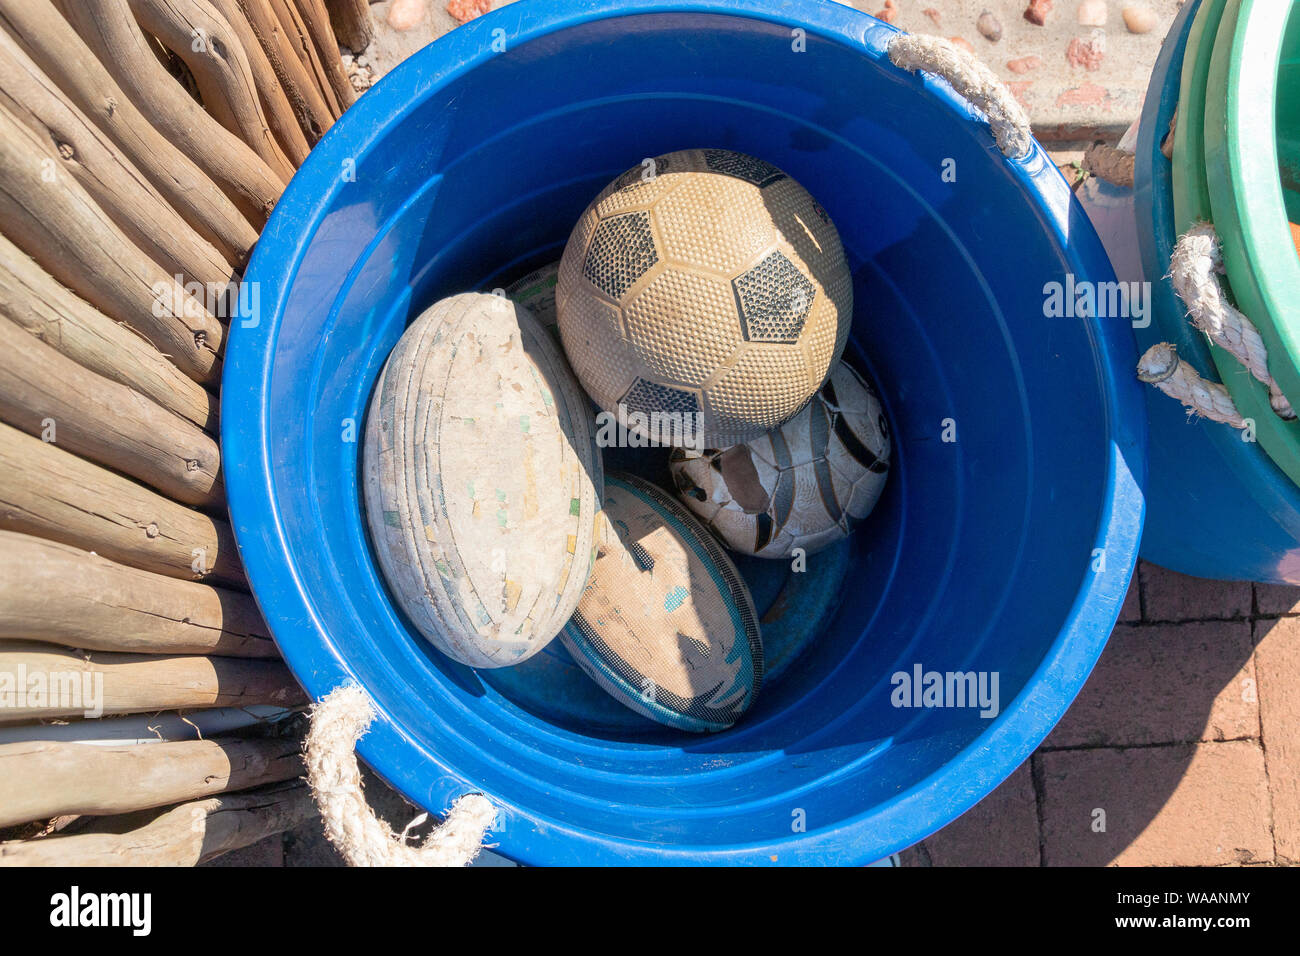 A close up view of rugby, soccor balls in a blue plastic bucket Stock Photo